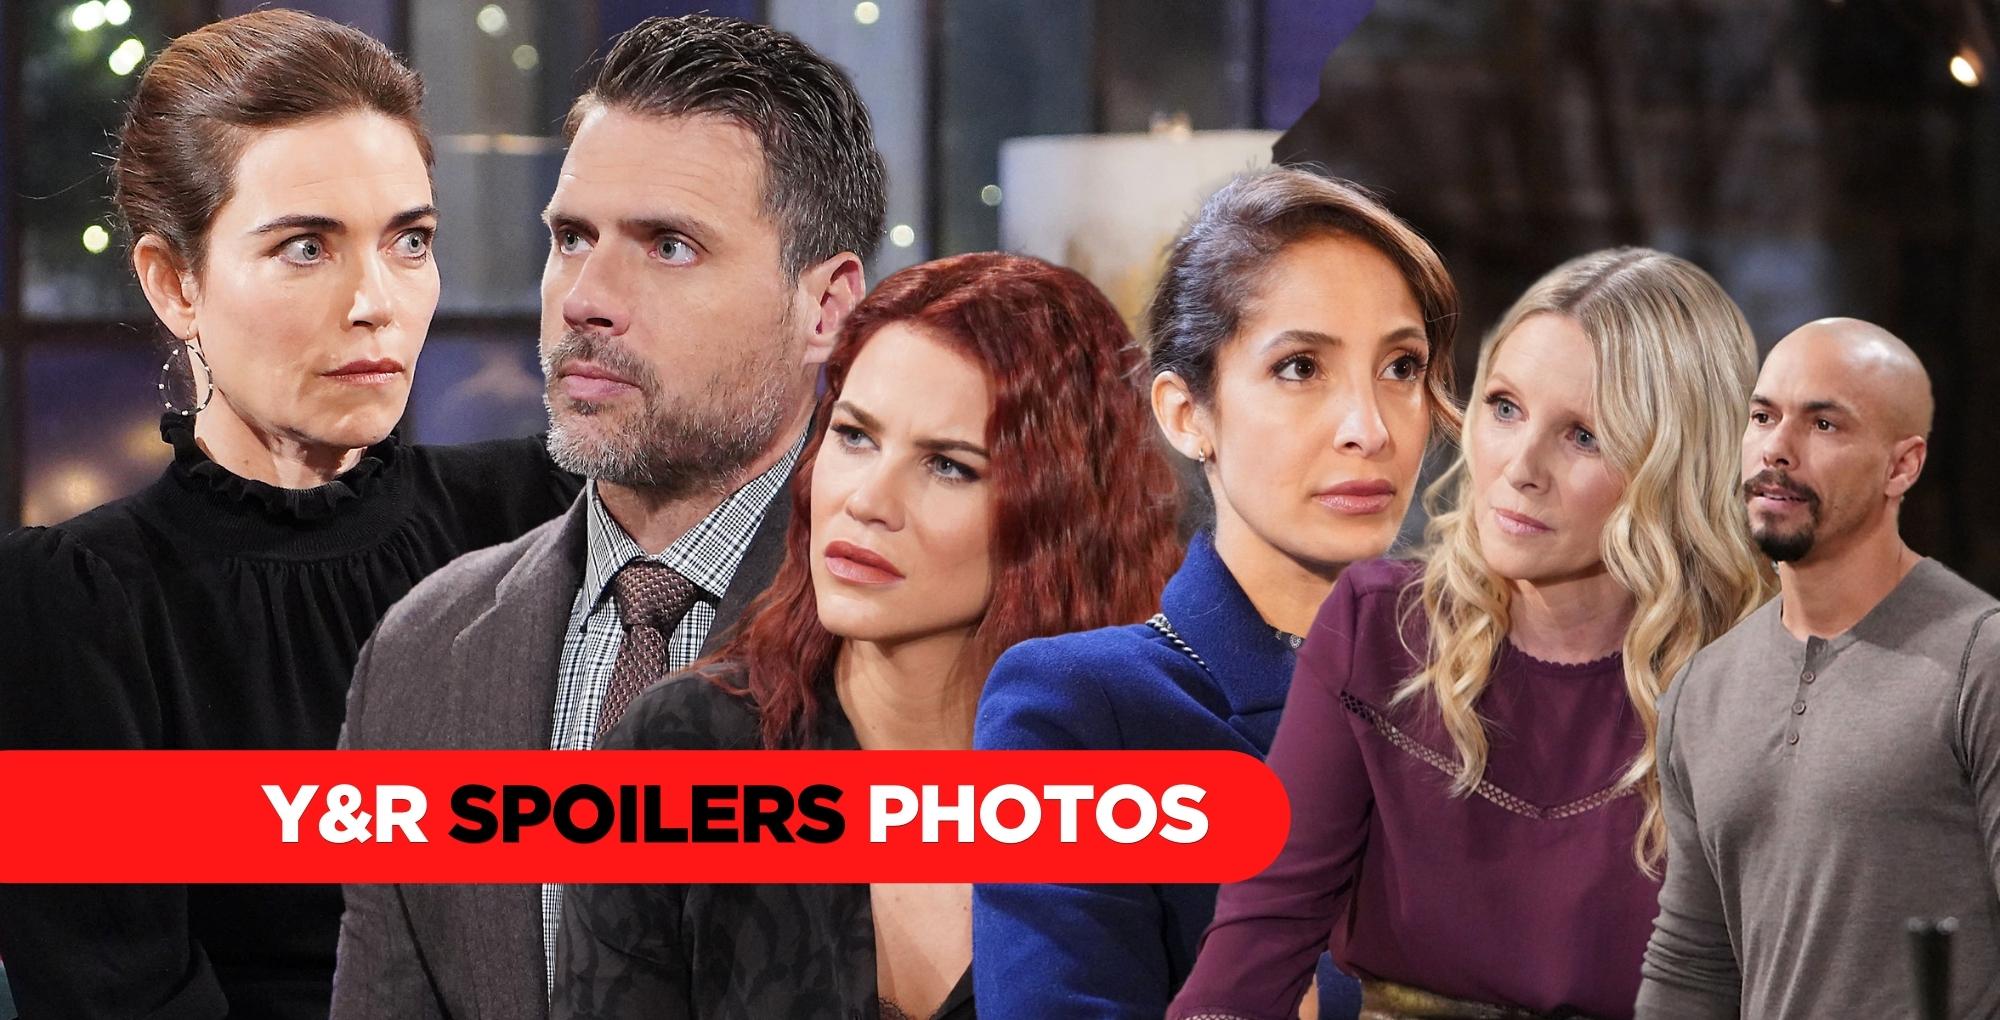 y&r spoilers photos for tuesday, february 14